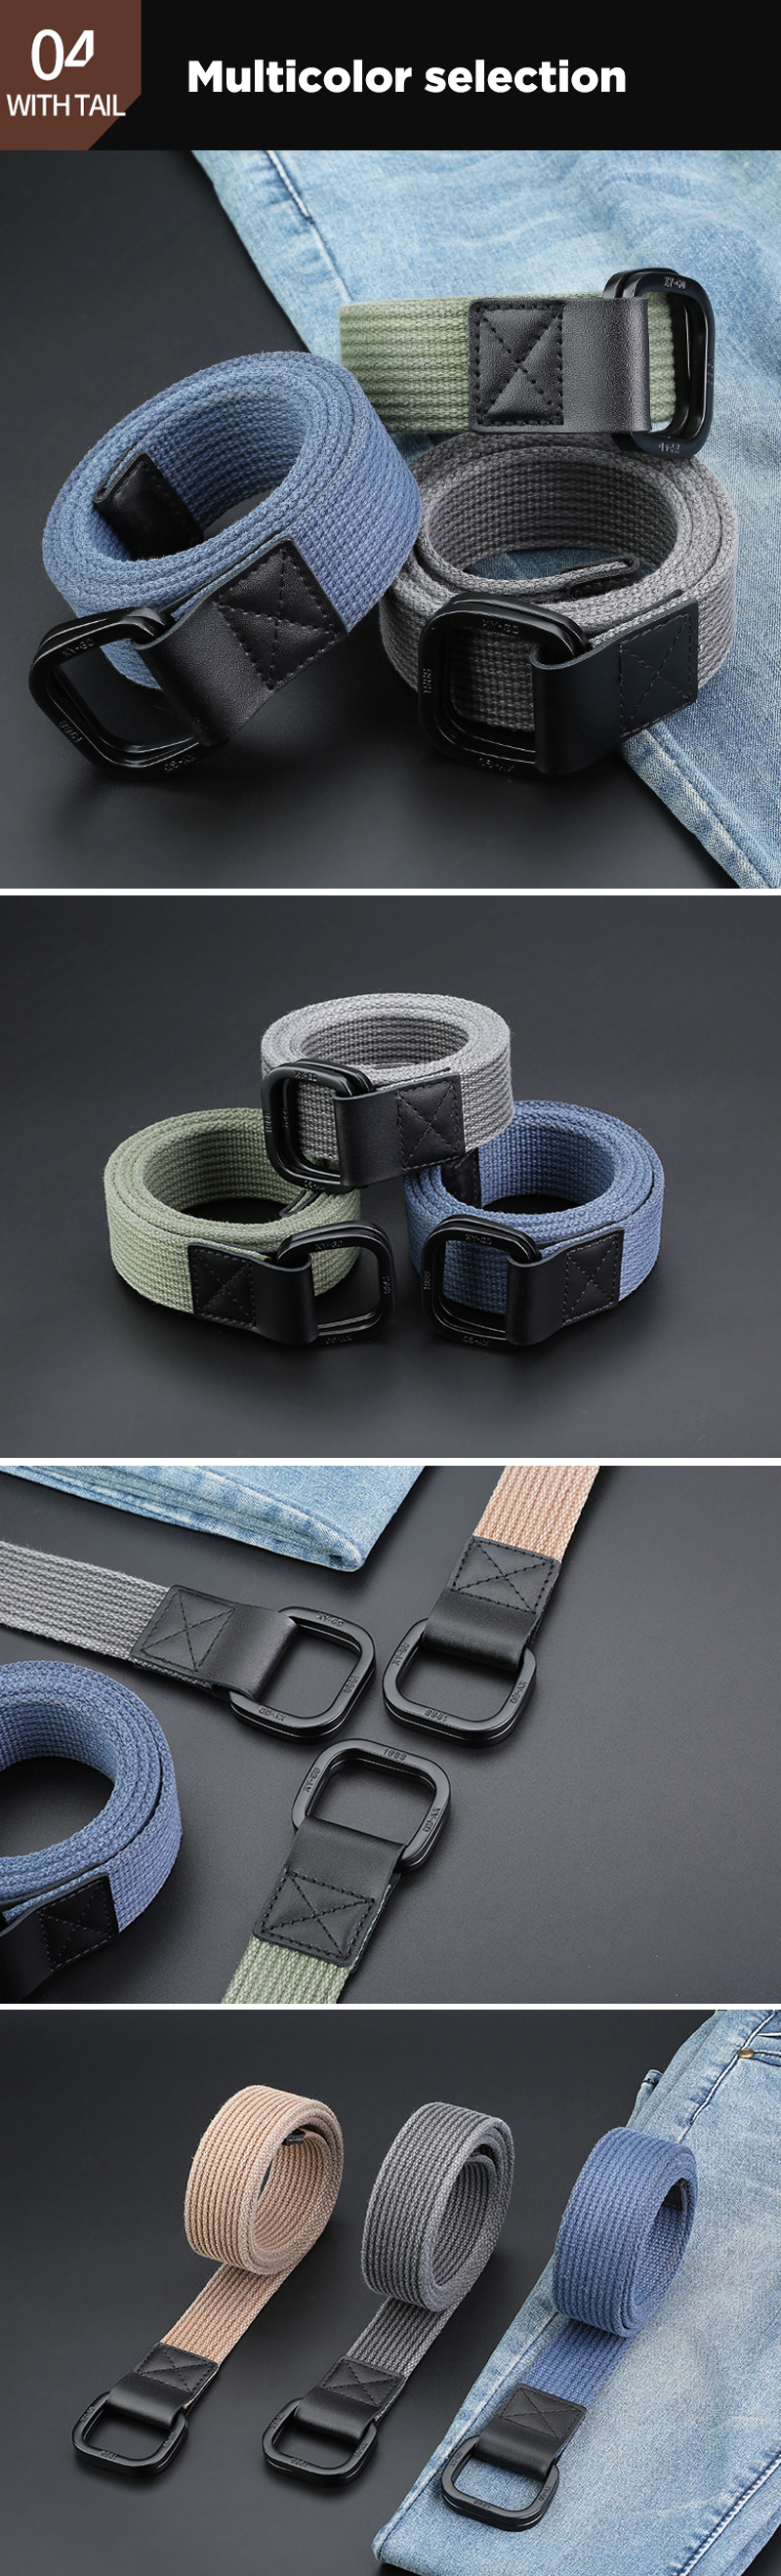 140cm-ZANLURE-DB02-Punch-Free-Buckle-Canvas-Waist-Belt-Tactical-Belt-For-Outdoor-Sports-Hunting-1536481-2